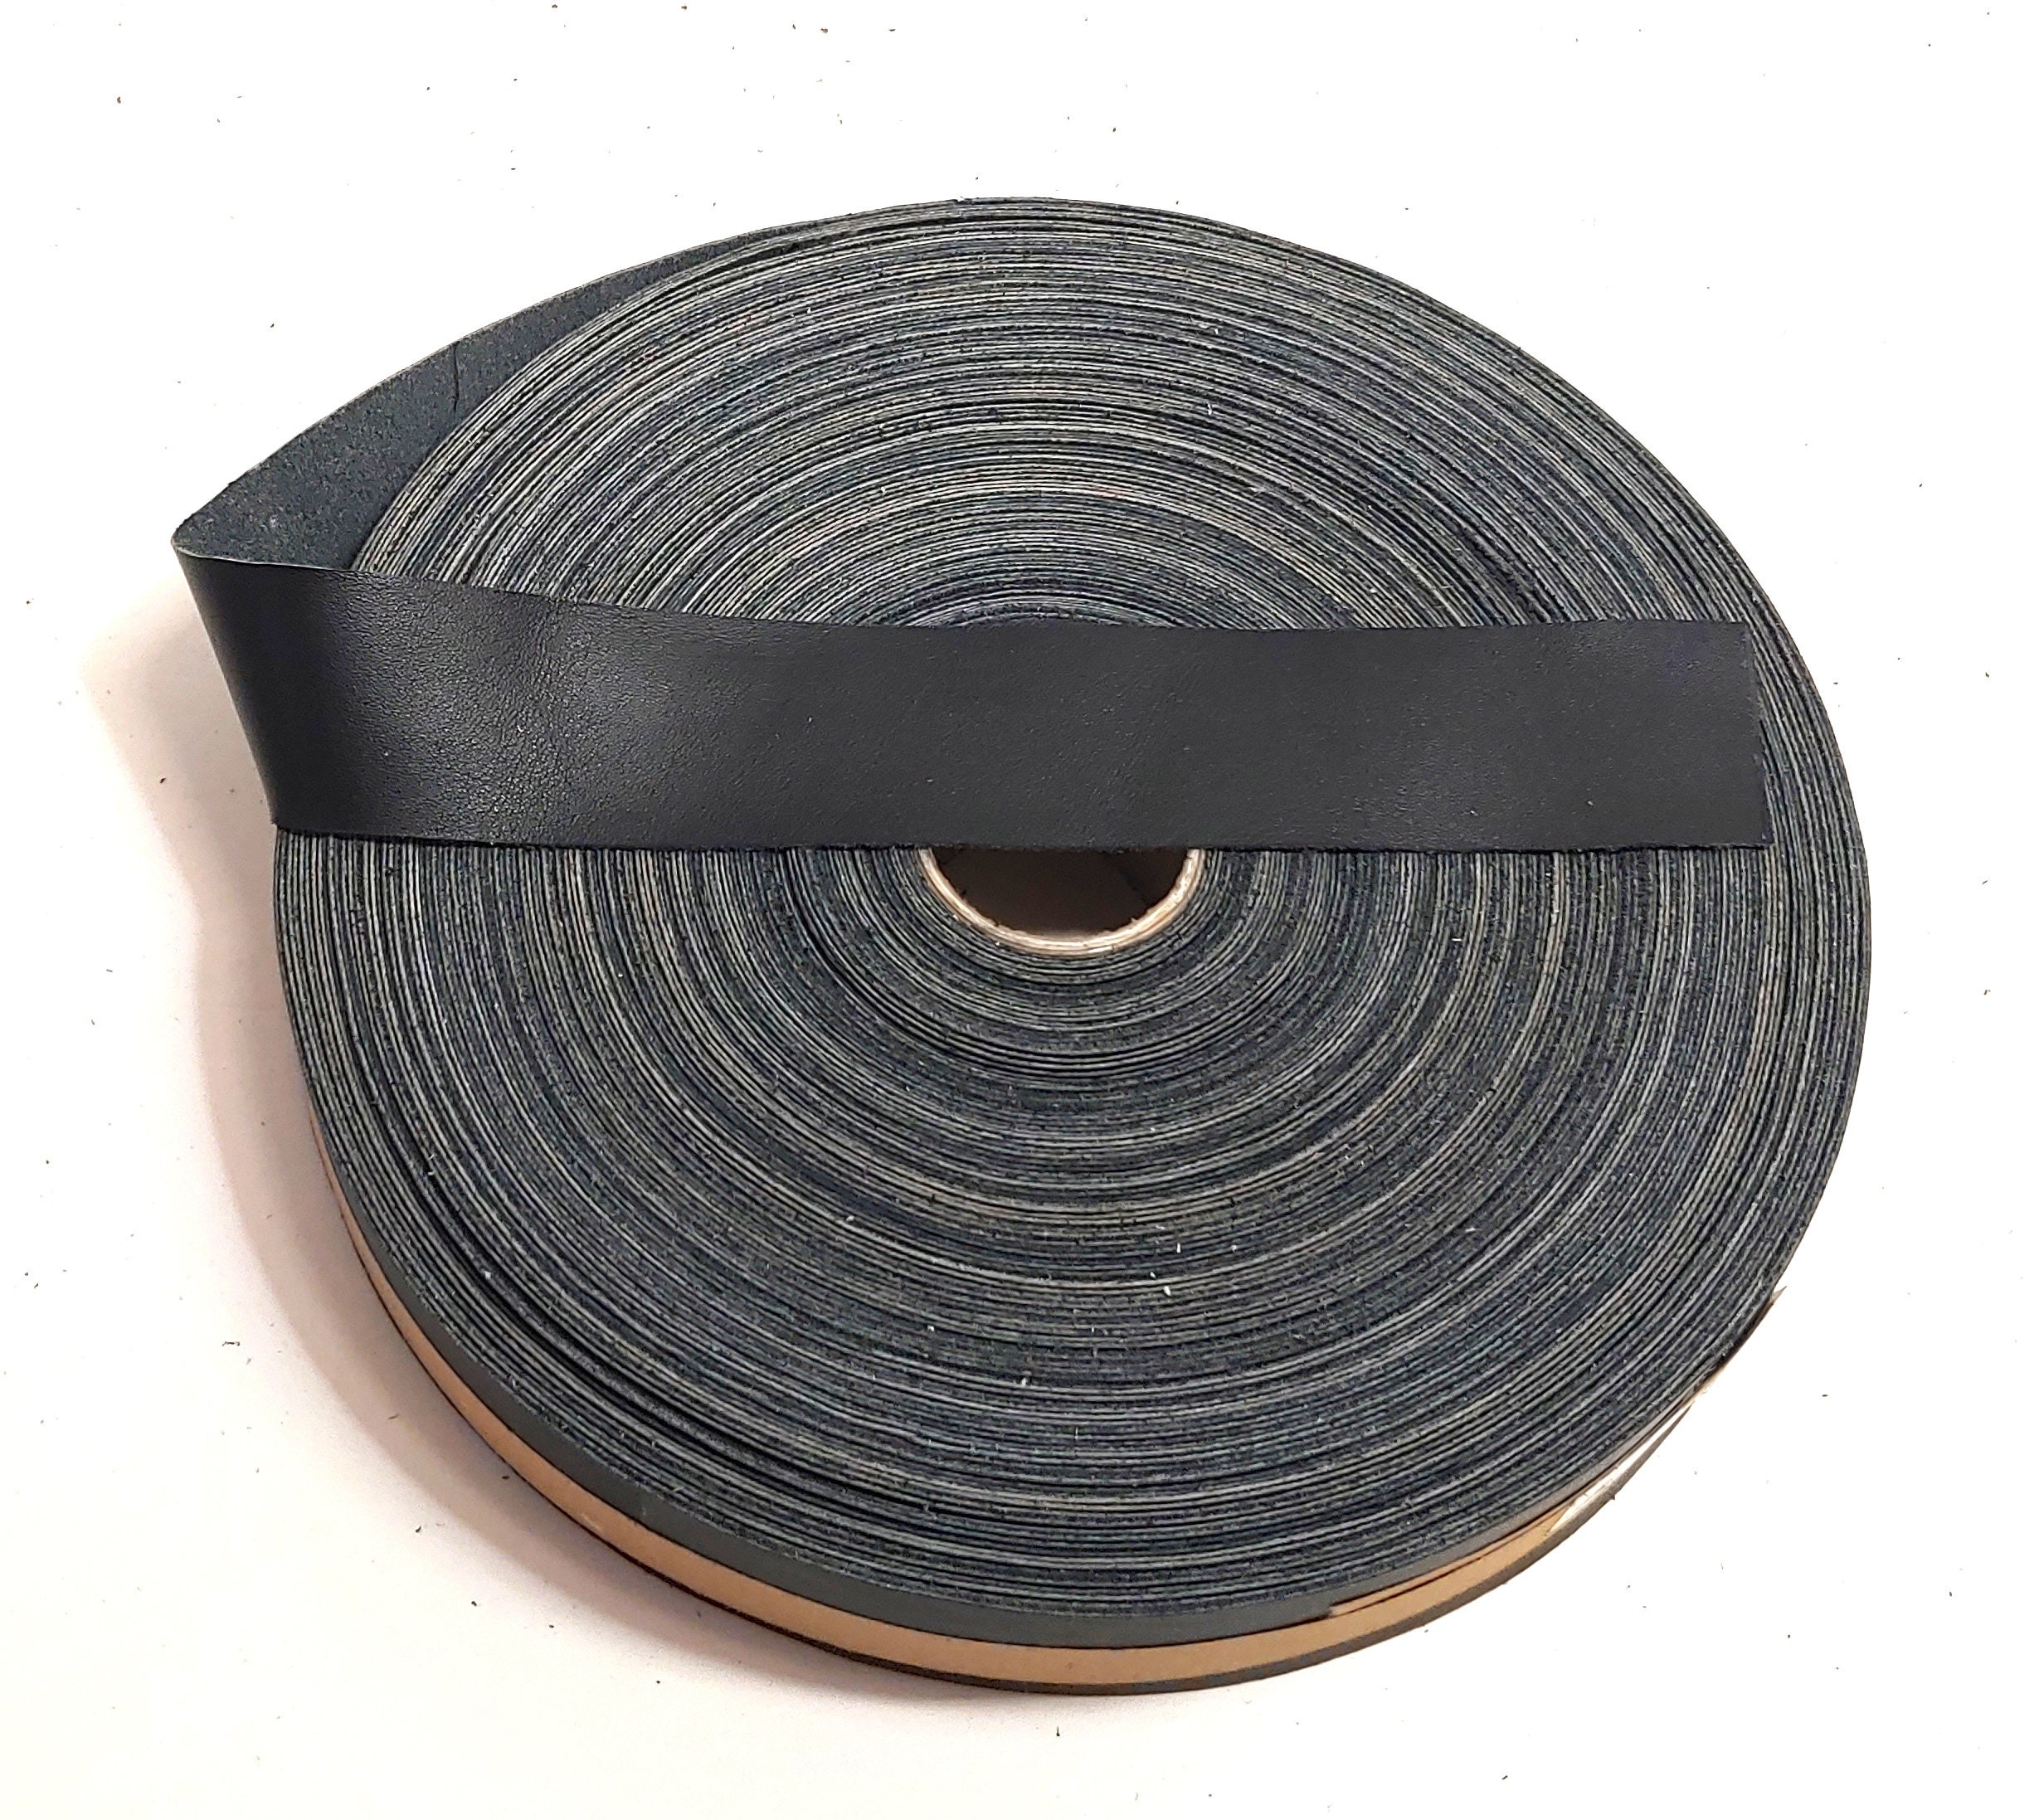 20 Mm Colorfull Leather Sewing Tape, Leather Bias Tape, Sewing Binding,  Trim 0.78 Inches, Leather Sewing Trim, Sewing Bias 